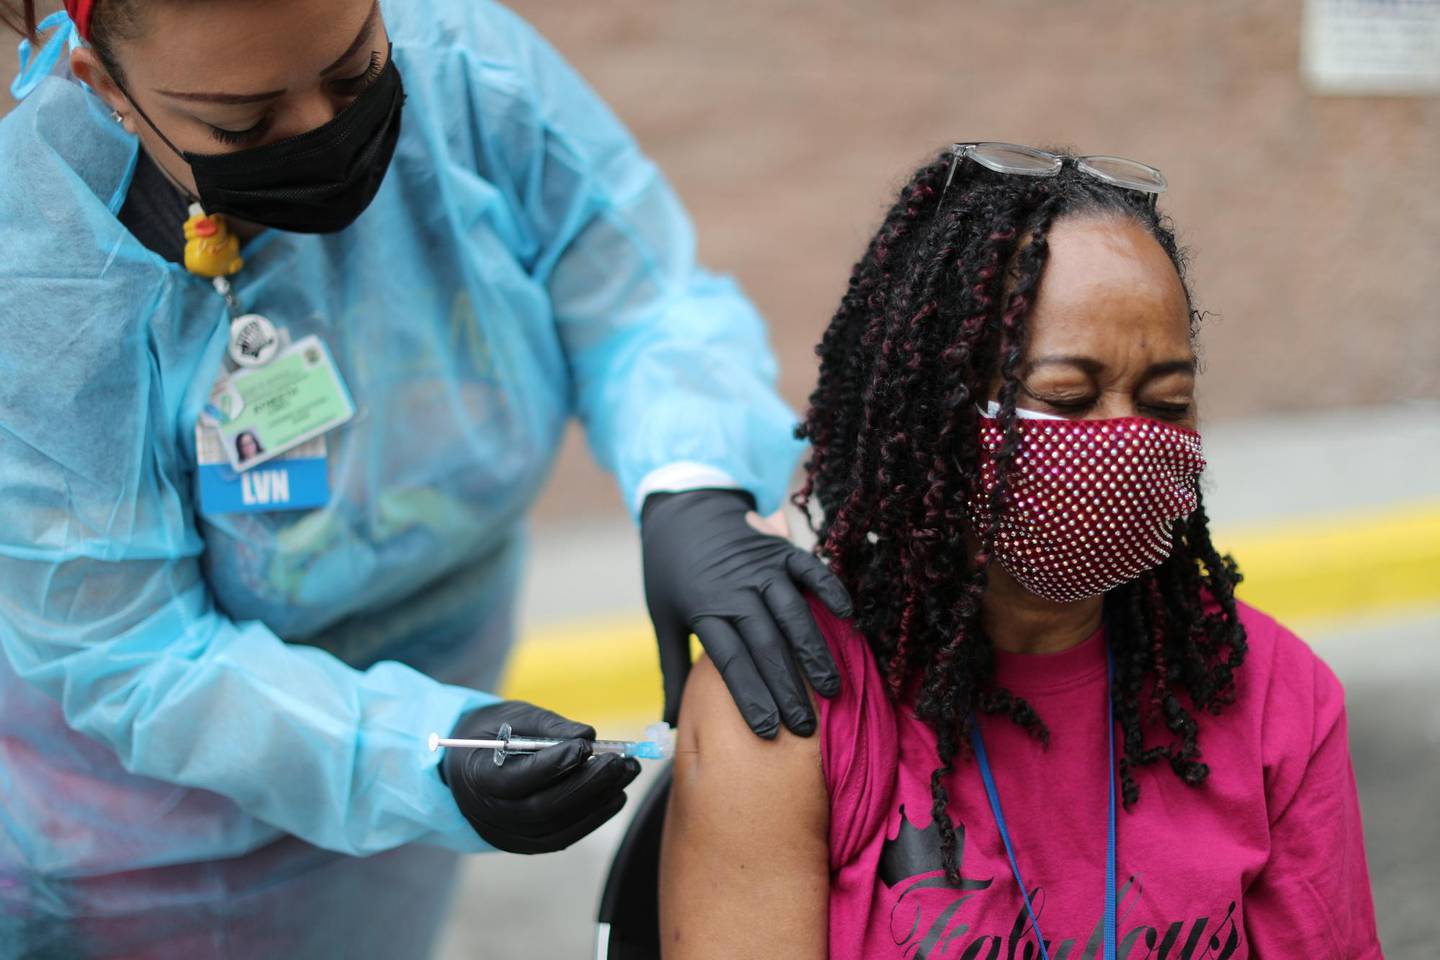 LA Mission guest services tech Felecia Weathersby, 65, receives a coronavirus disease (COVID-19) vaccination at the LA Mission homeless shelter on Skid Row, in Los Angeles, California, U.S., February 10, 2021. REUTERS/Lucy Nicholson